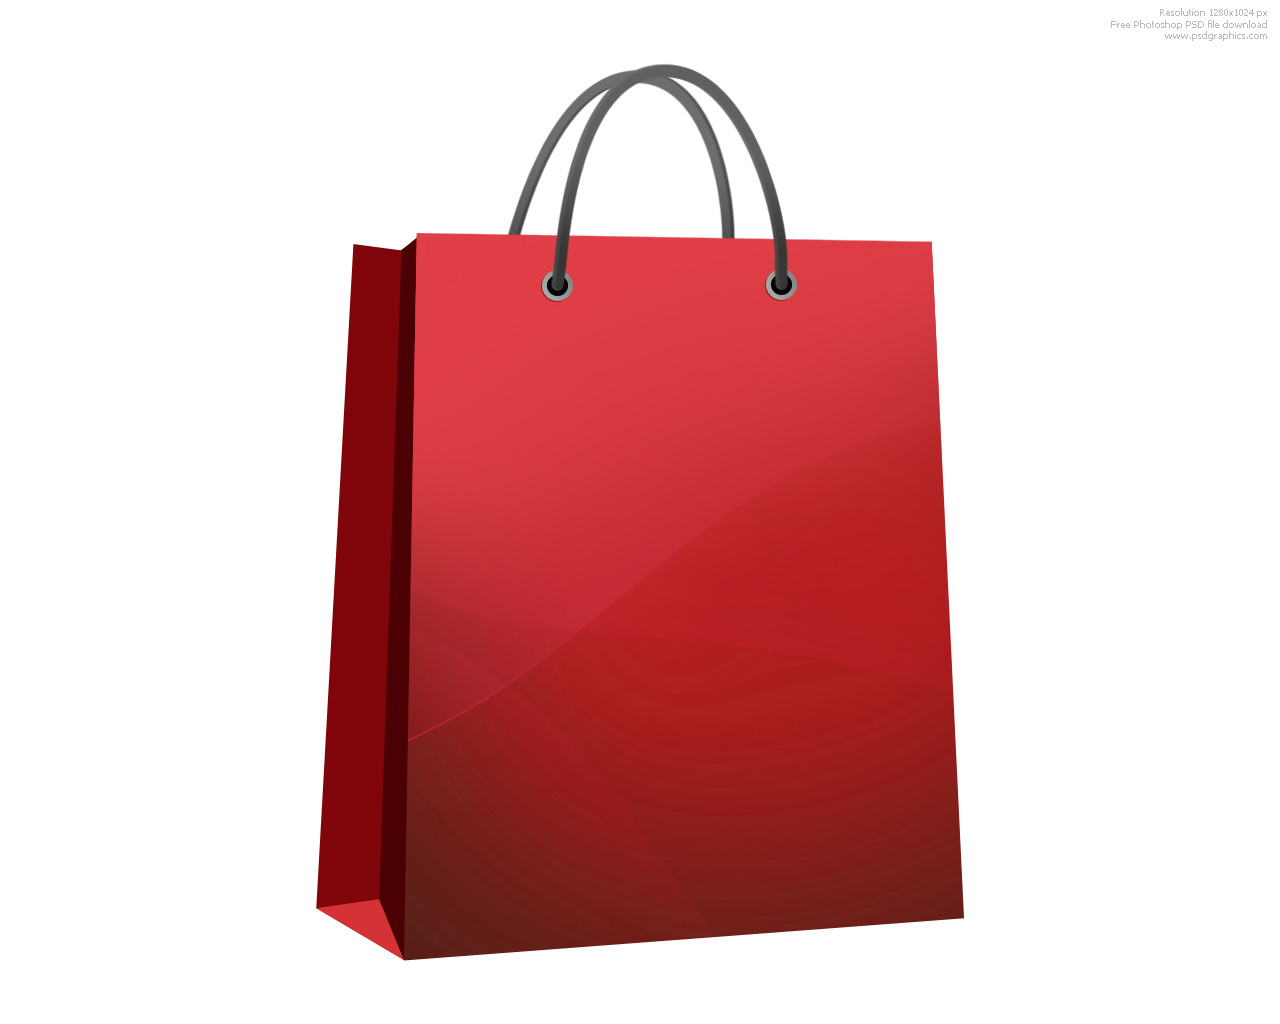 15 Shopping Bag Clip Art Free Cliparts That You Can Download To You